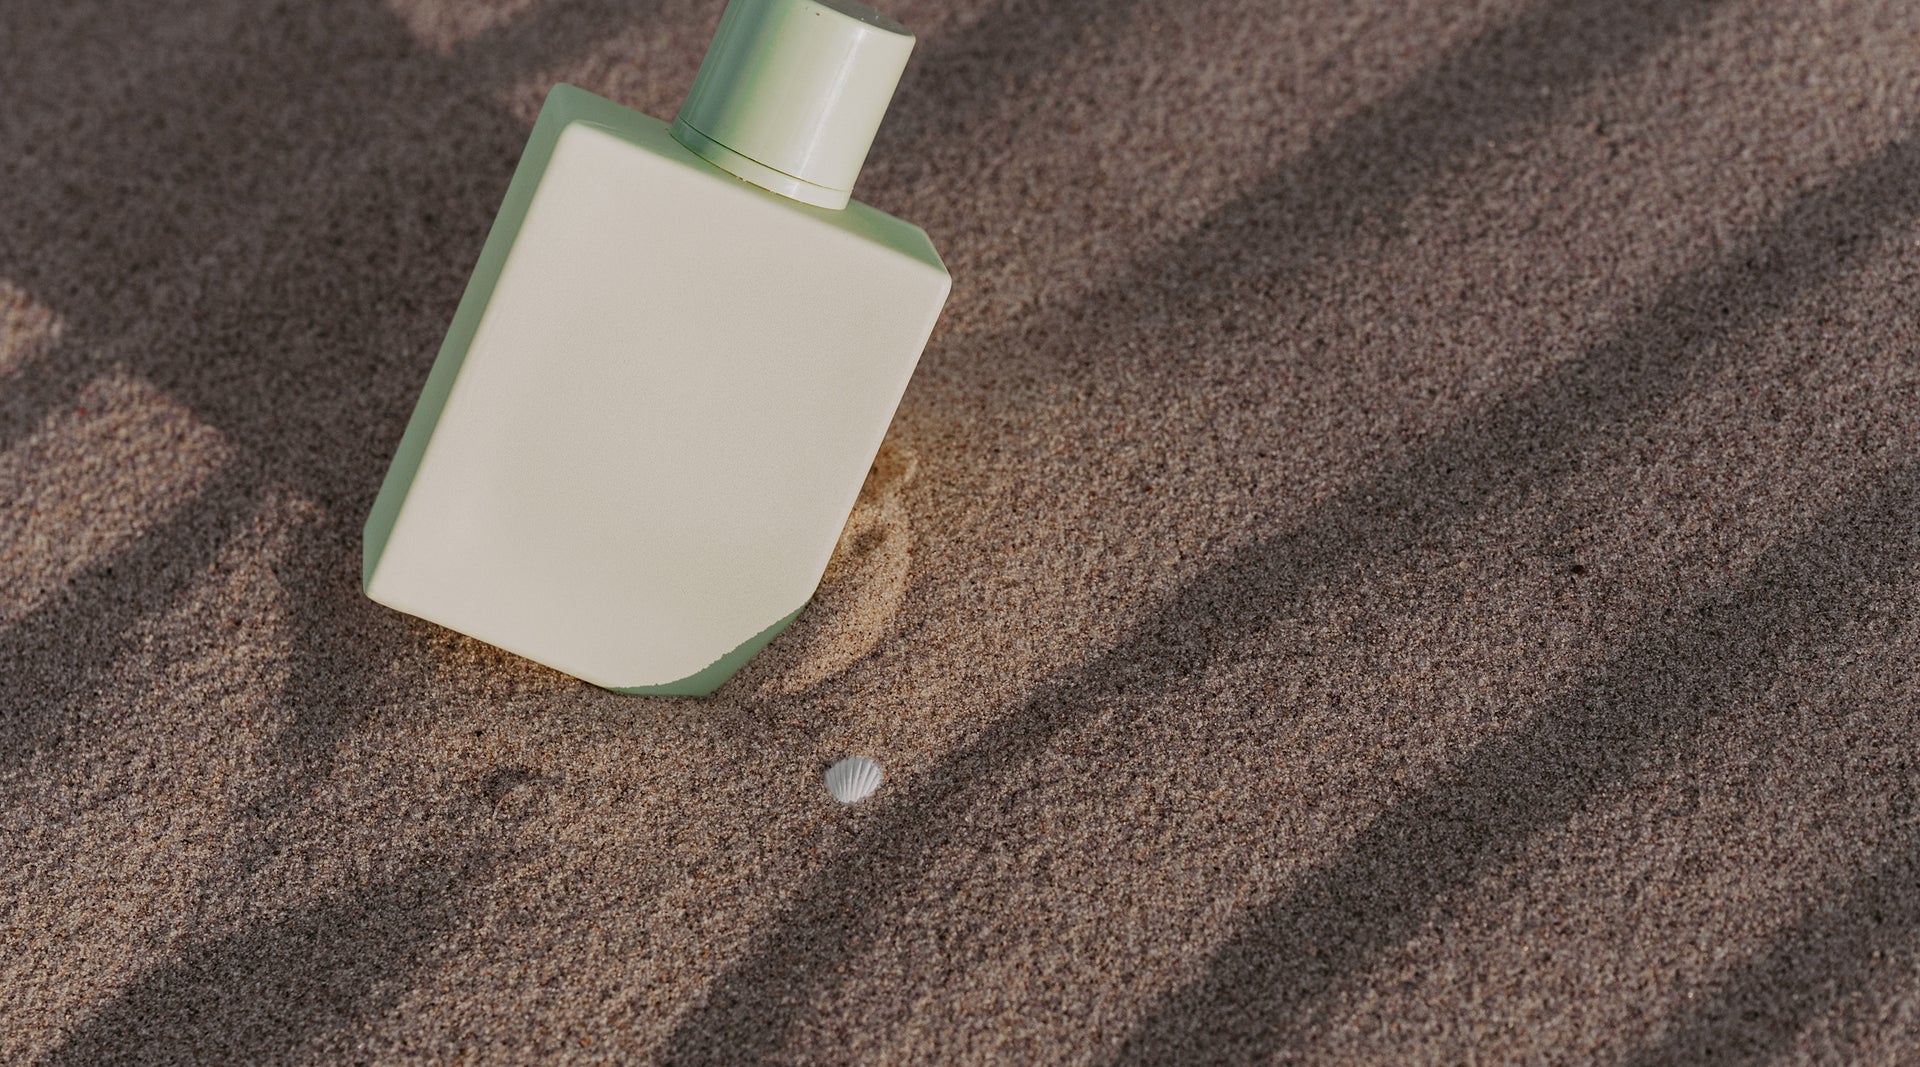 The Definitive Beauty Packing List for a Beach Vacation